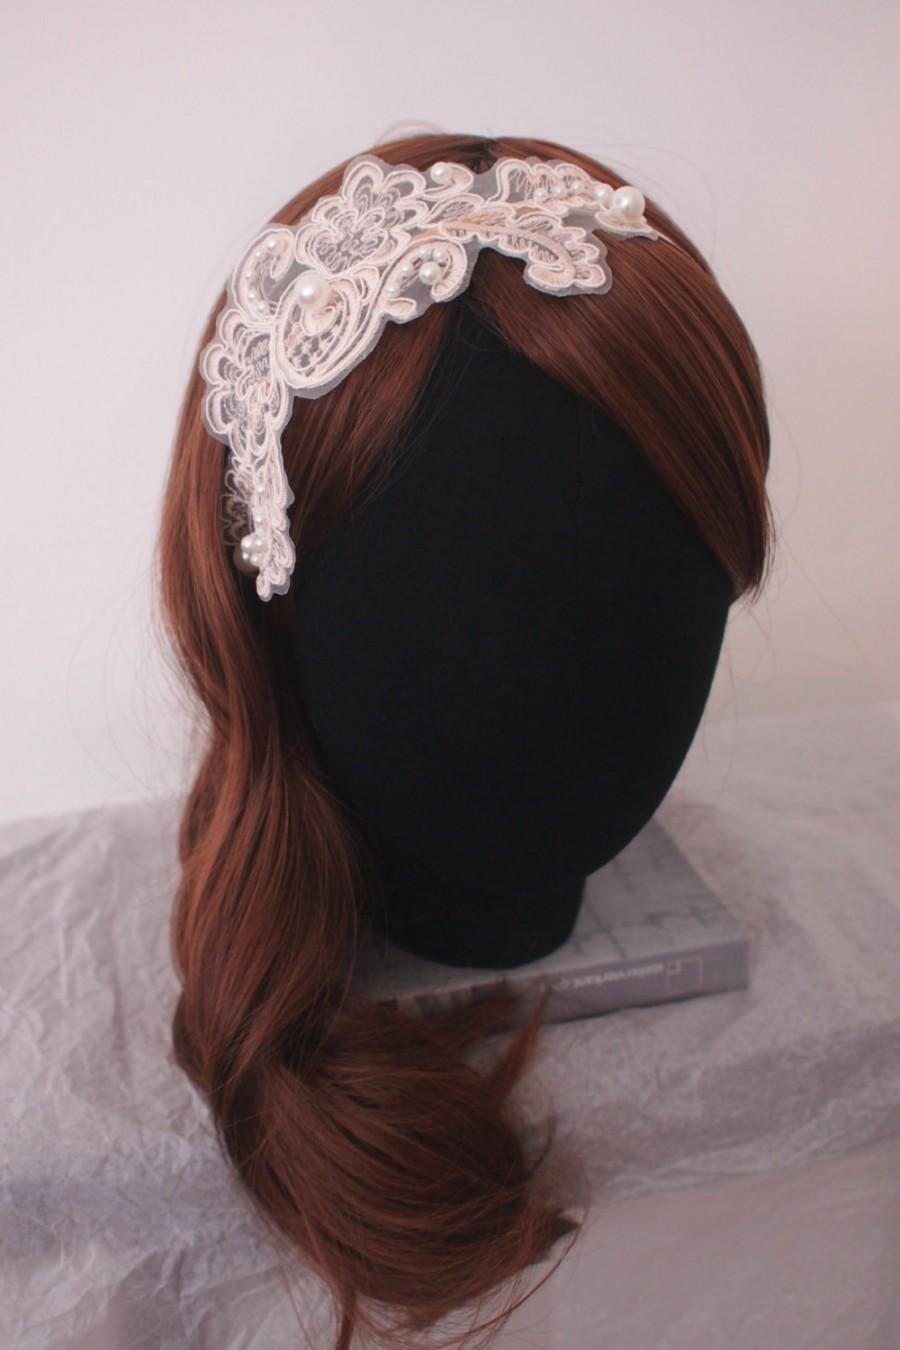 Mariage - 1920s' Victorian Style Wedding Headpiece -- Hand Embroidered Pearls on Lace Headband -- for Bridal /Bridesmaid / Formal Party